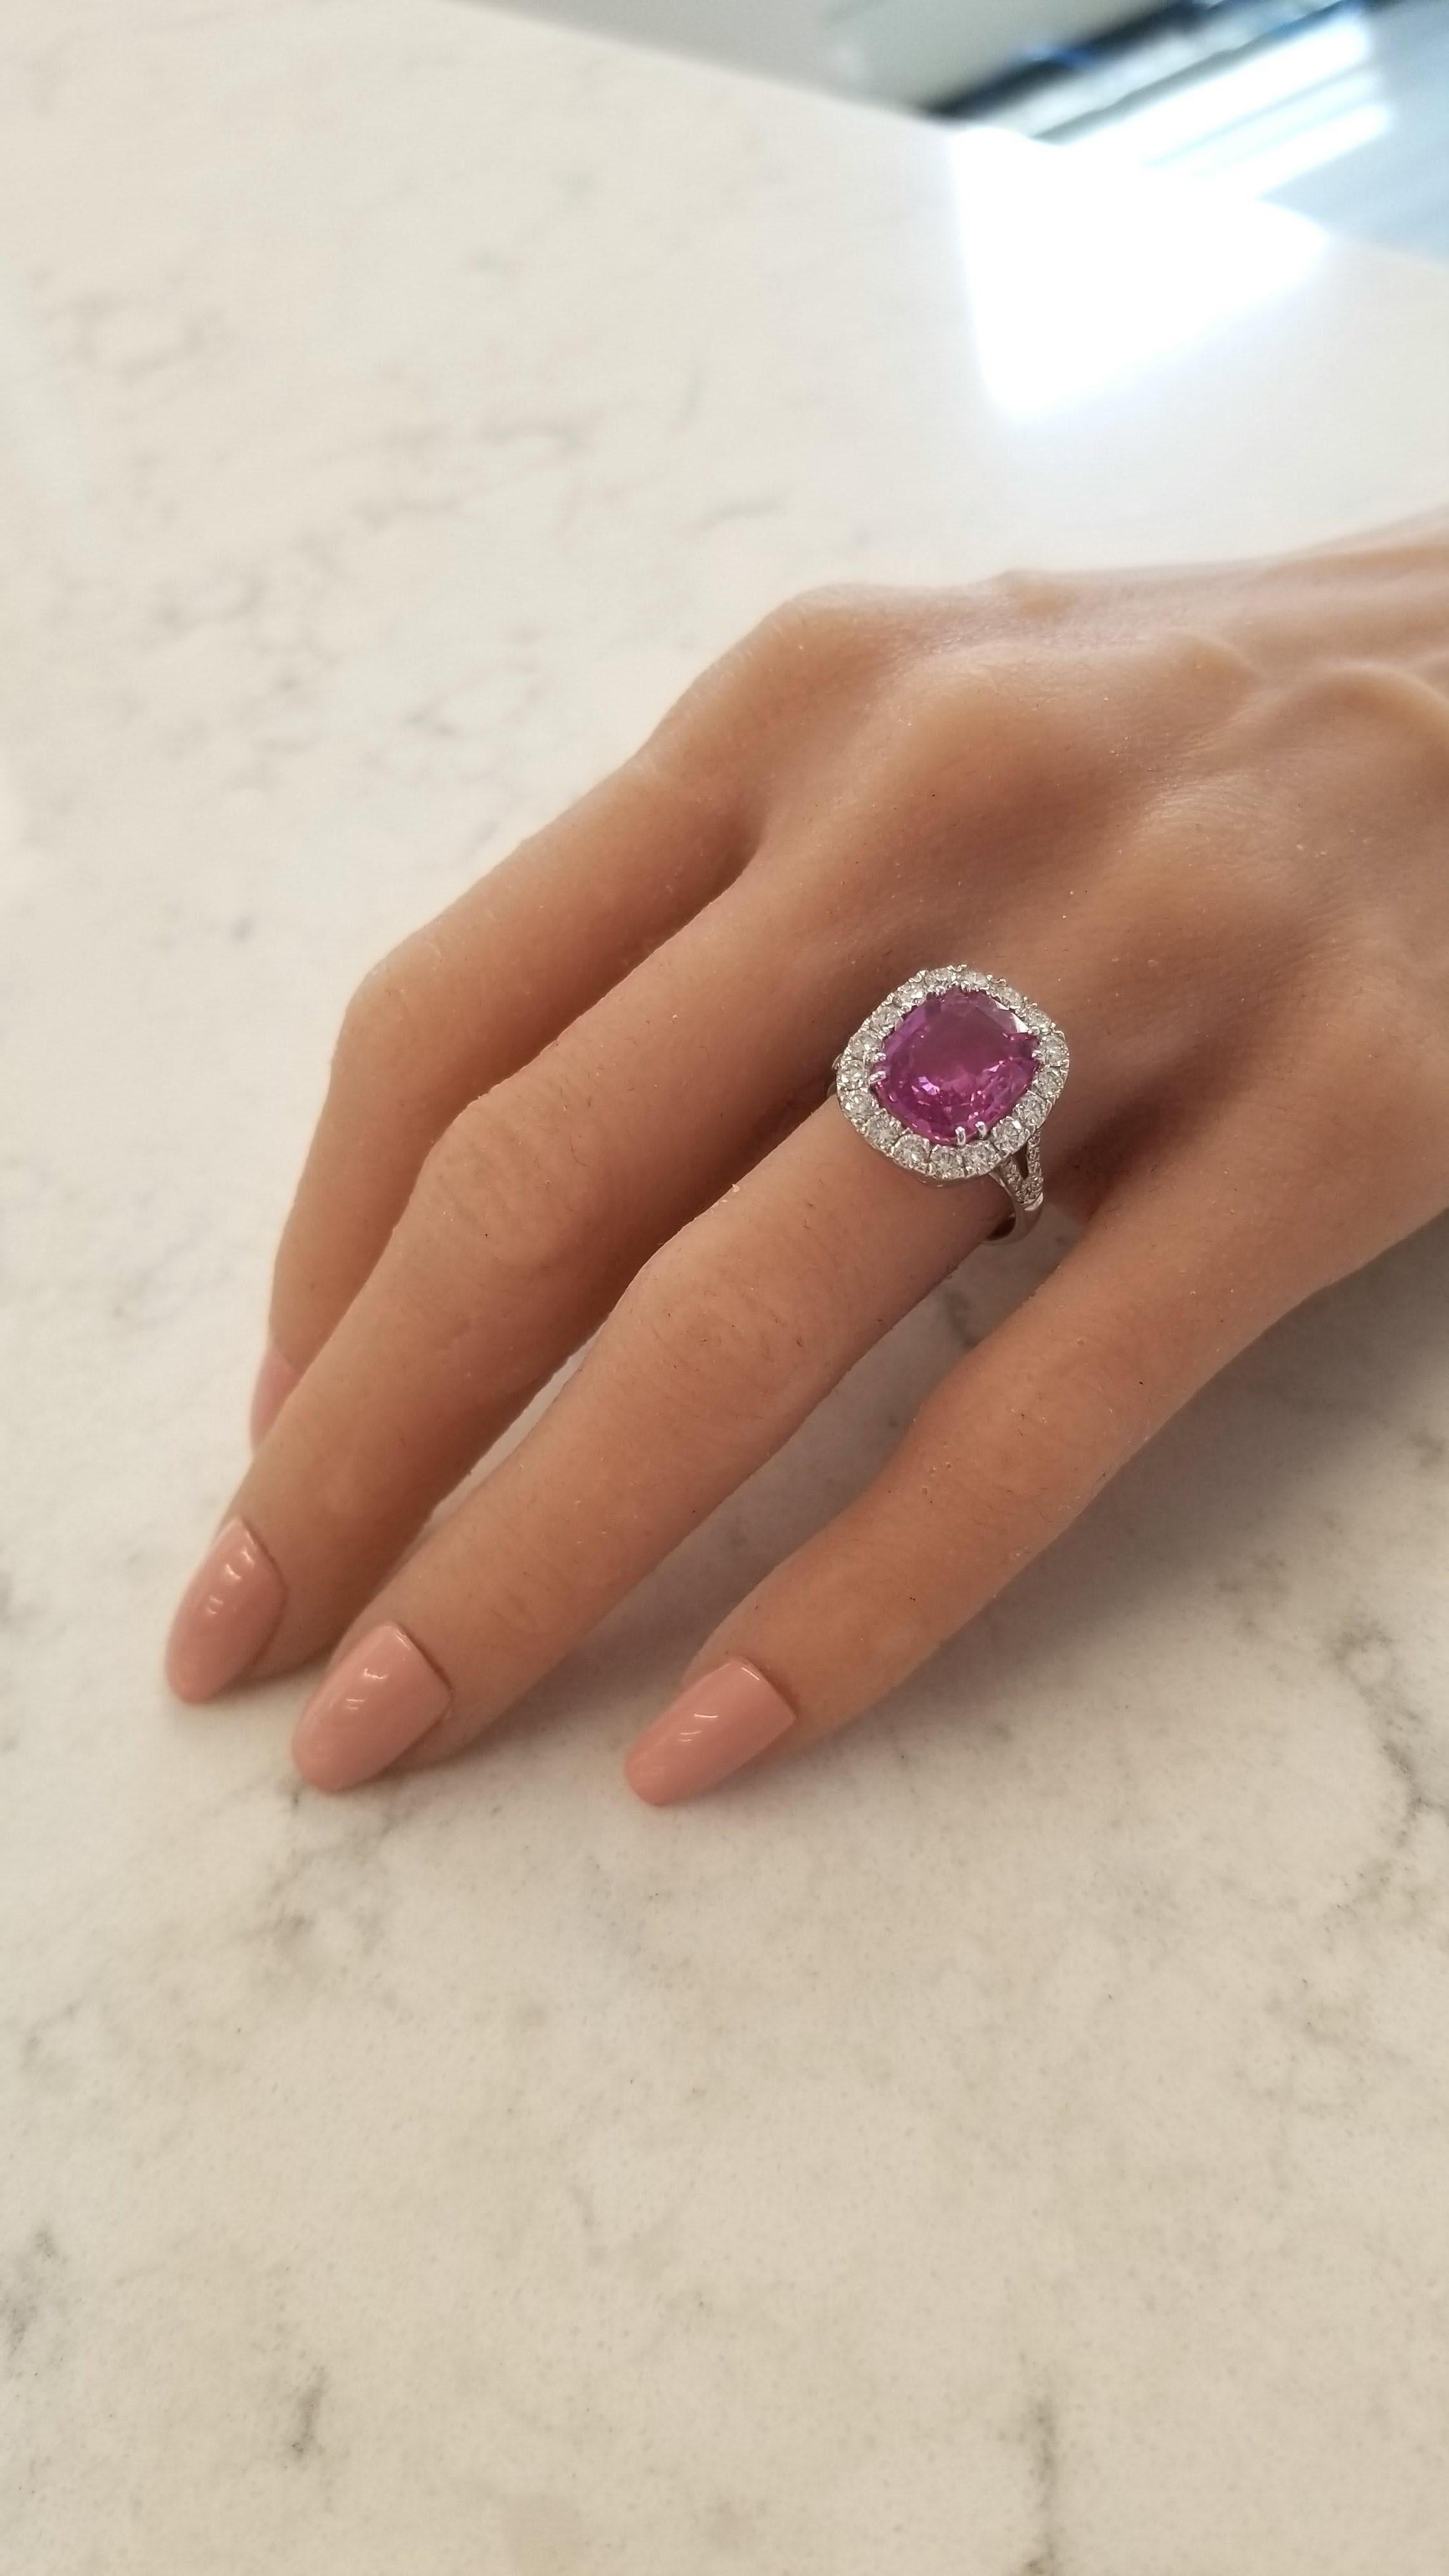 This impressive halo ring features a GIC certified cushion cut pink sapphire that weighs 6.06 carats and measures 11.71-9.82mm. Its color is an intense raspberry purplish-pink. The gem source is Sri Lanka; its transparency and luster are excellent.